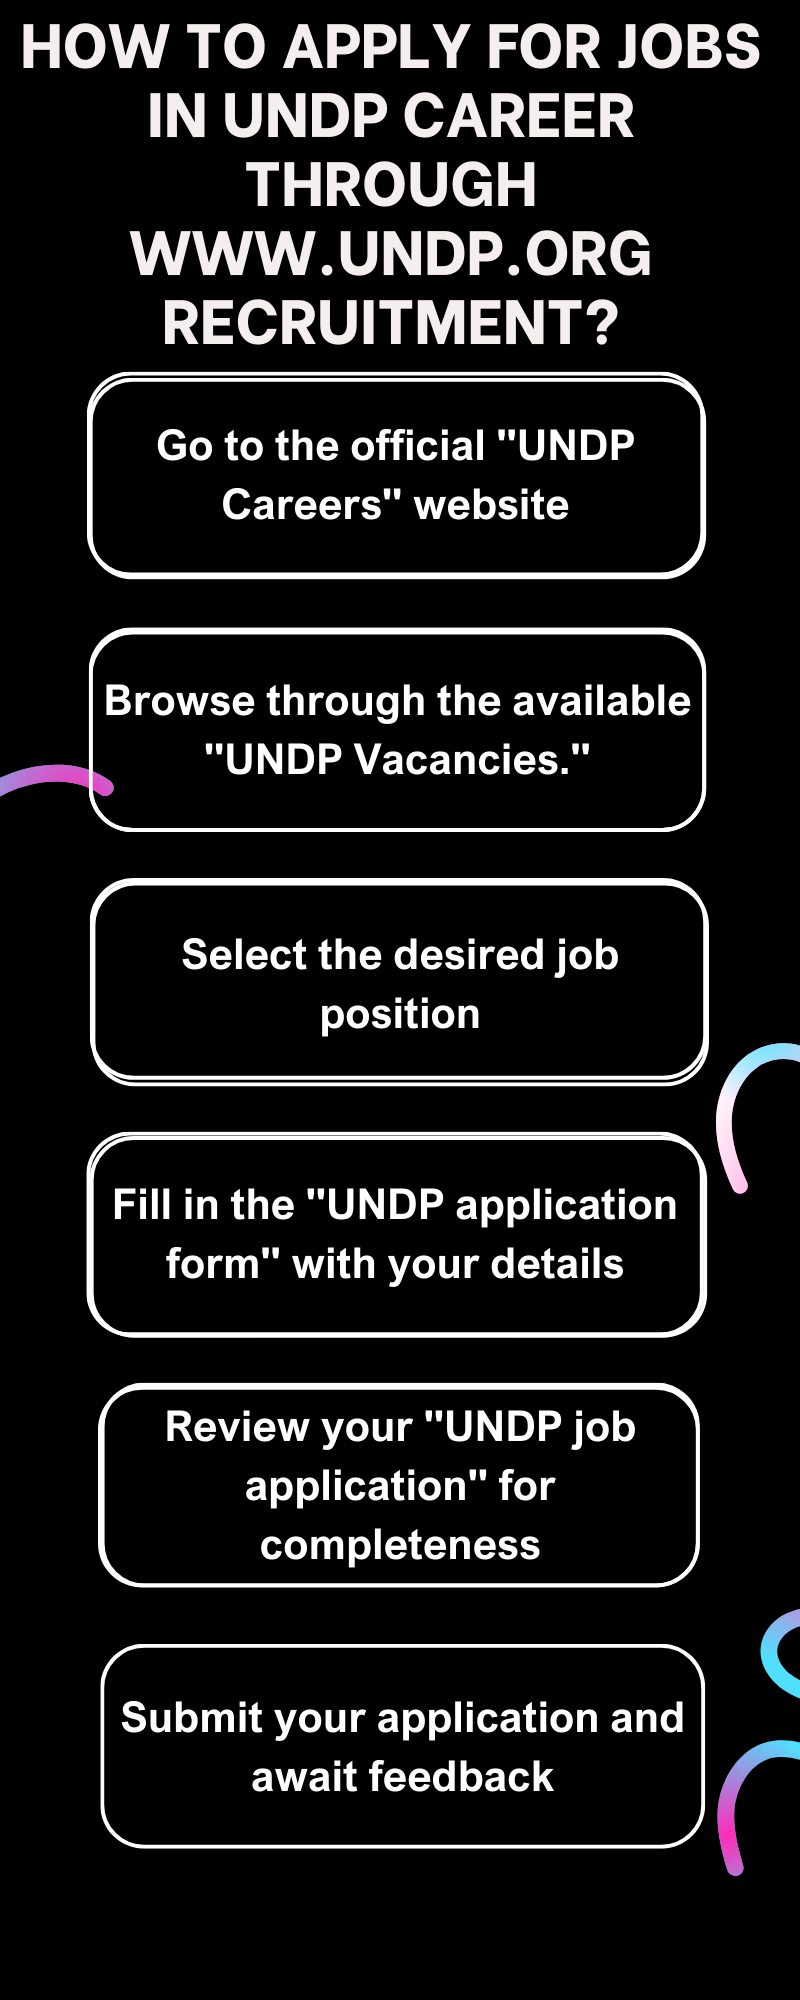 How to Apply for Jobs in UNDP Career through www.undp.org recruitment_